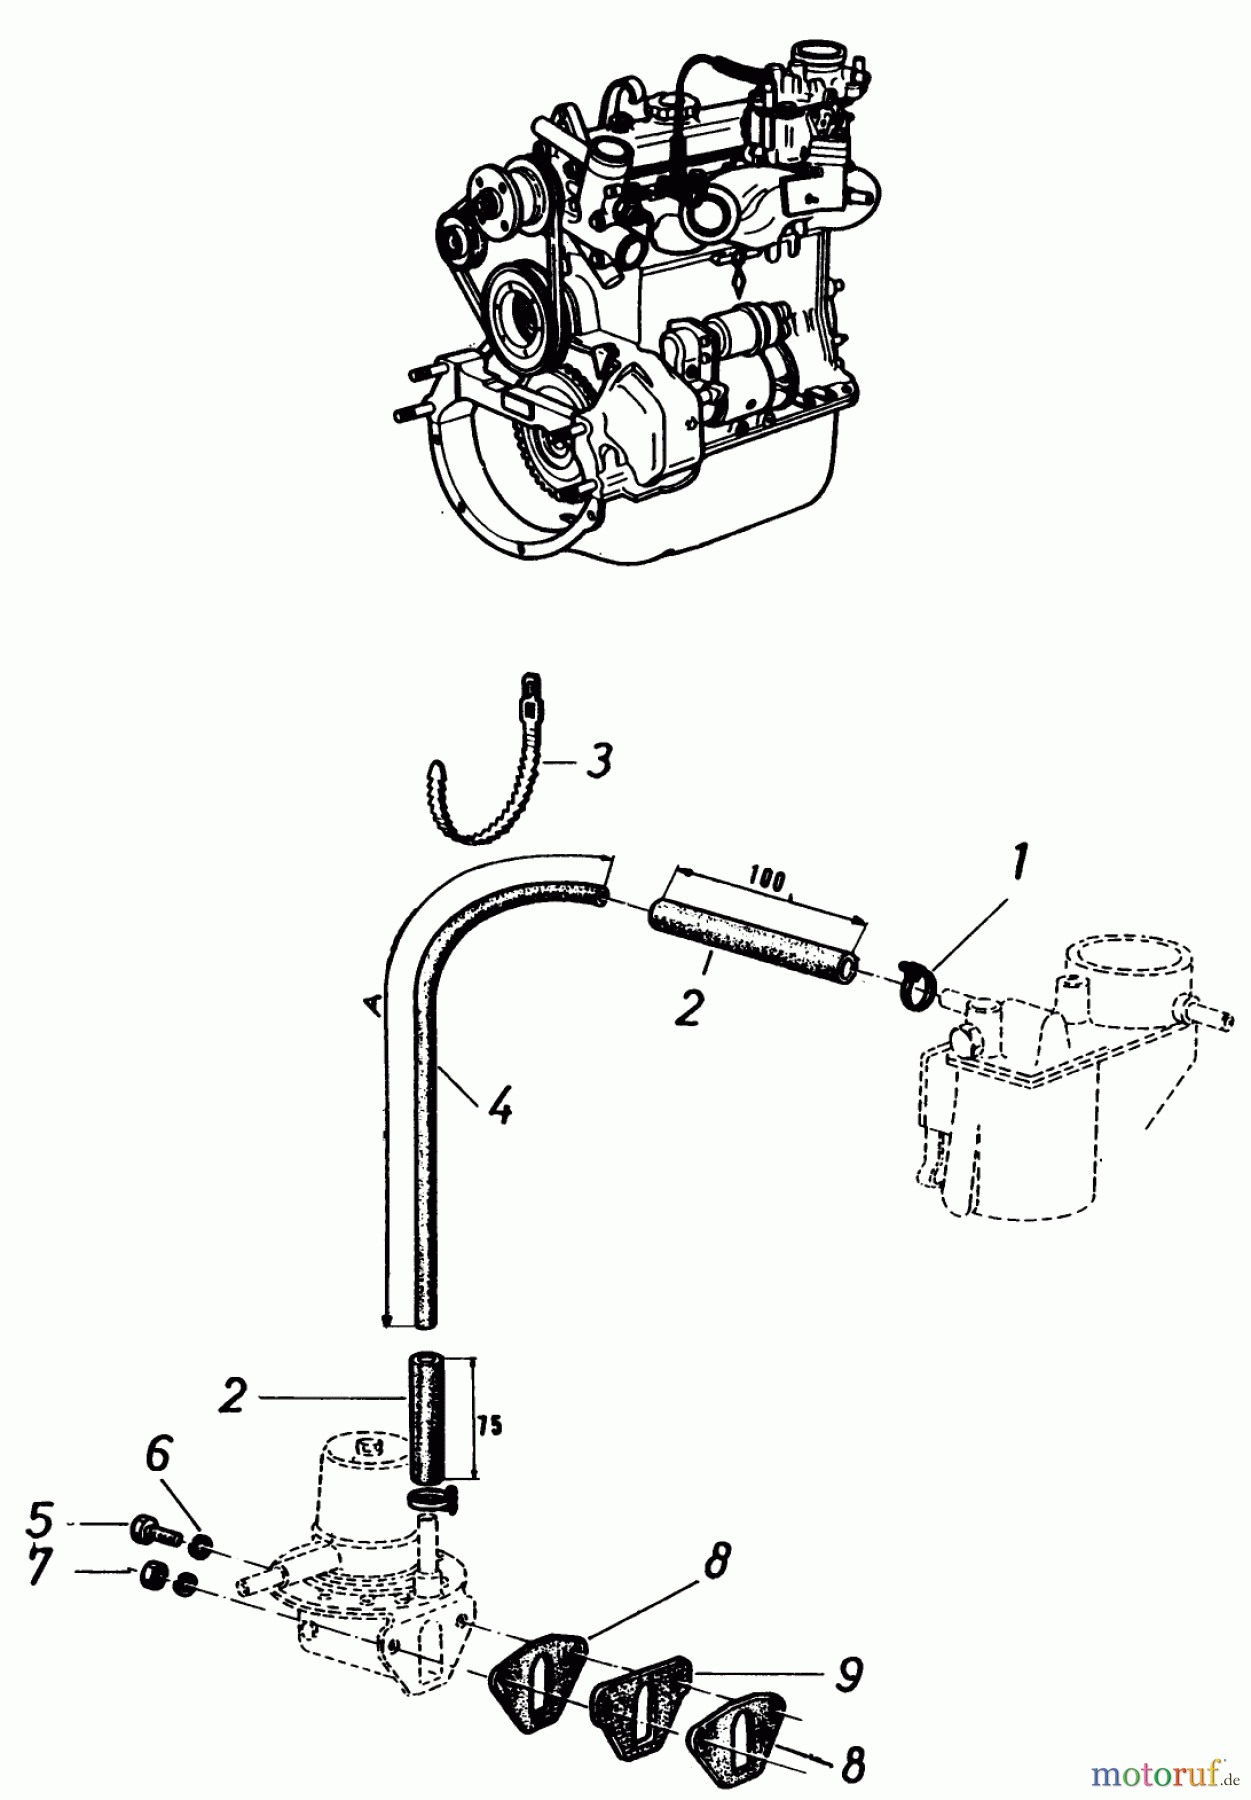  Toro Neu Mowers, Lawn & Garden Tractor Seite 2 91-20RG01 (D-250) - Toro D-250 10-Speed Tractor, 1981 ENGINE FUEL LINES AND FUEL PUMP MOUNTING HARDWARE